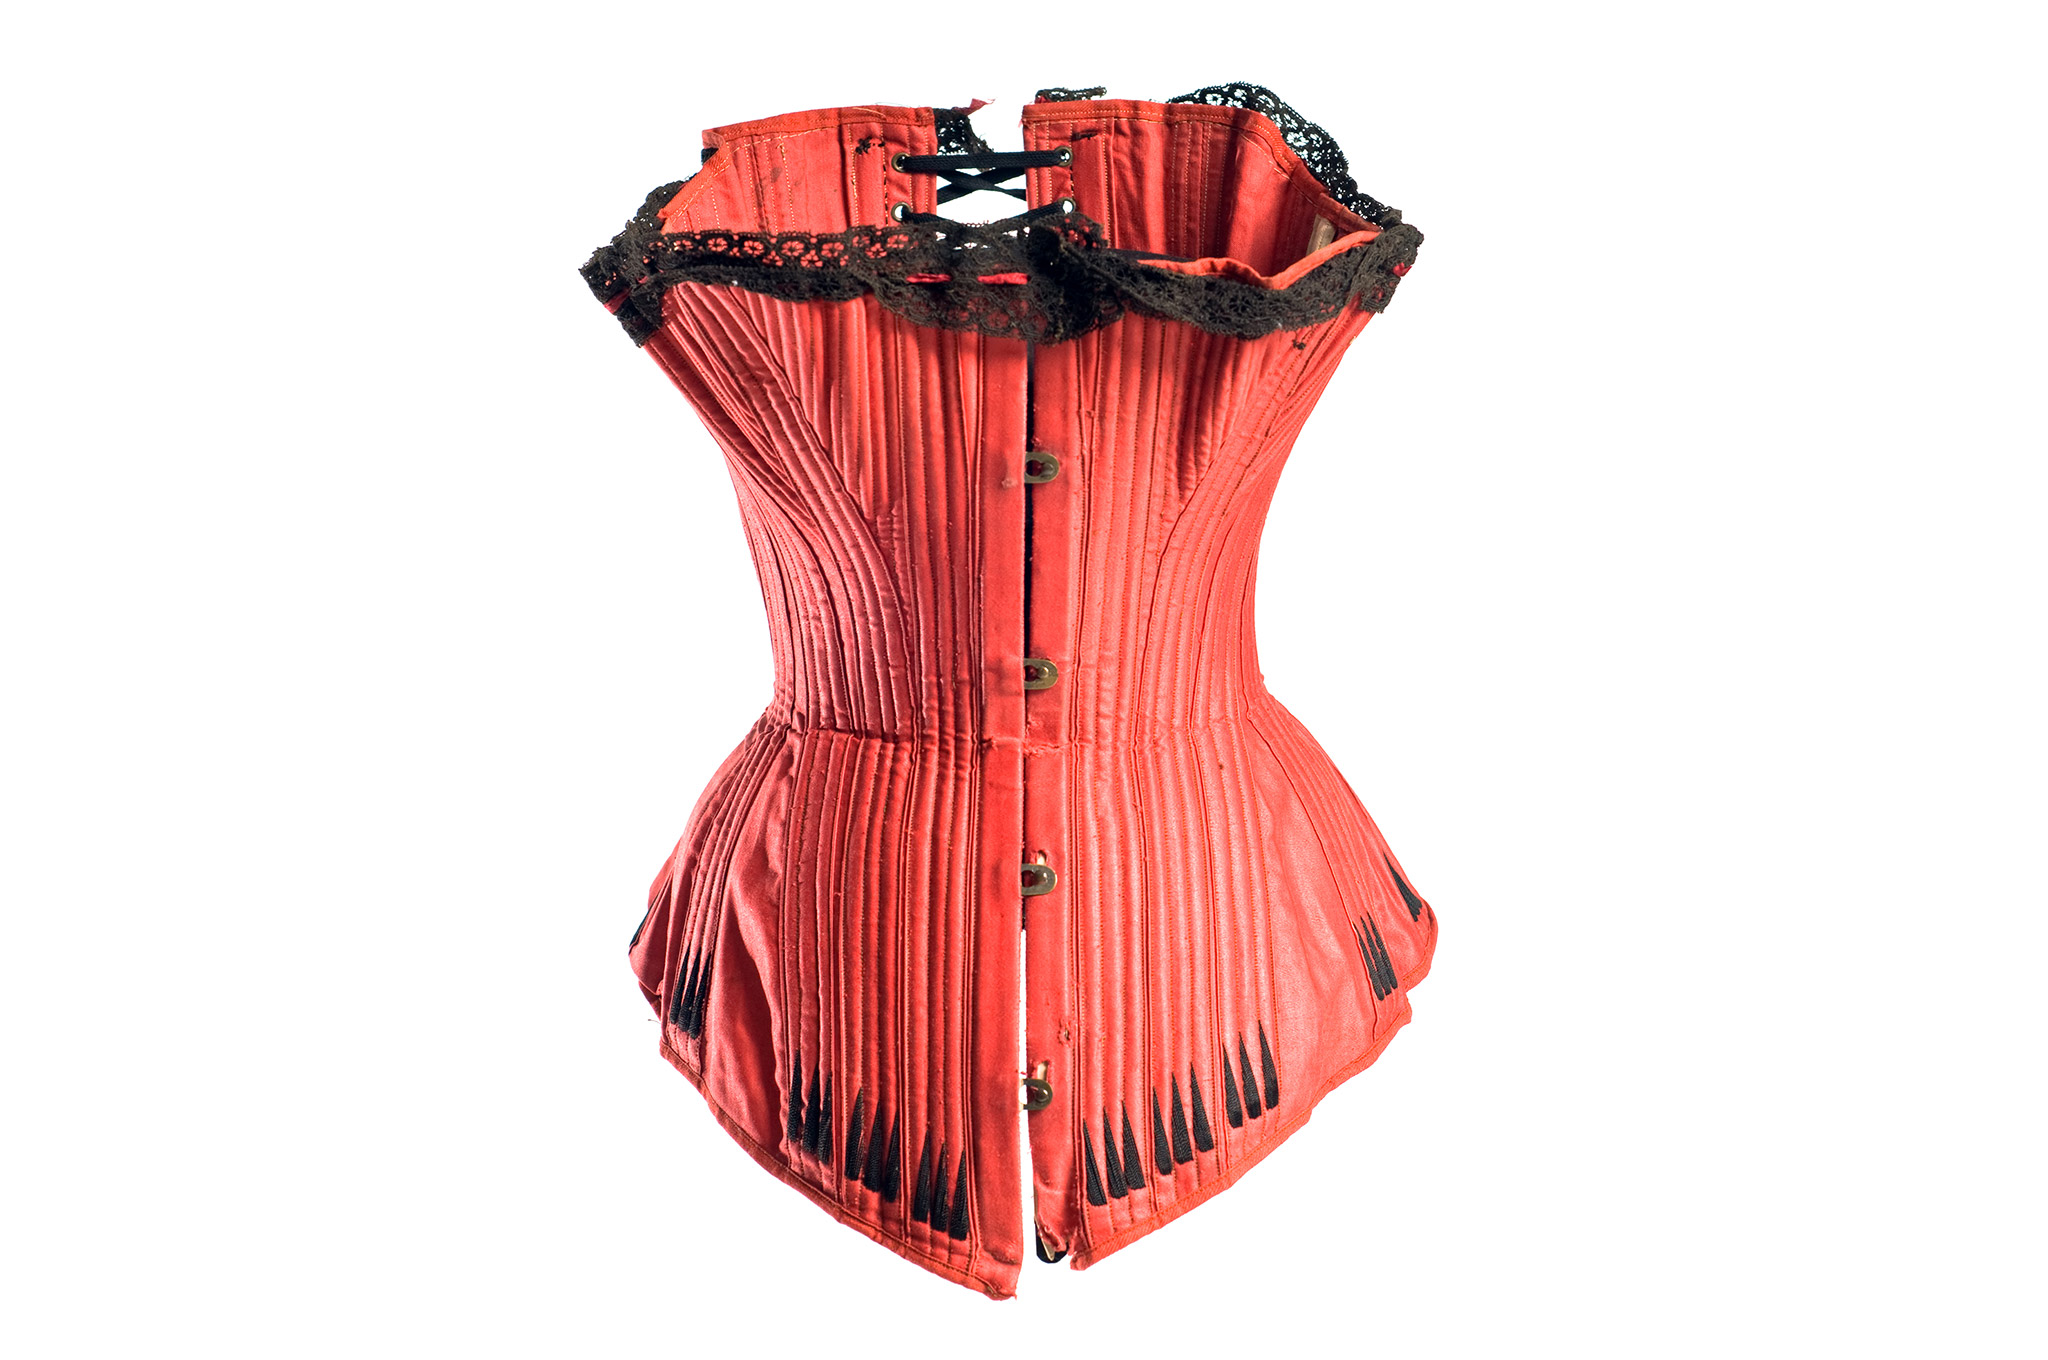 Breathe in, the corset is back in fashion